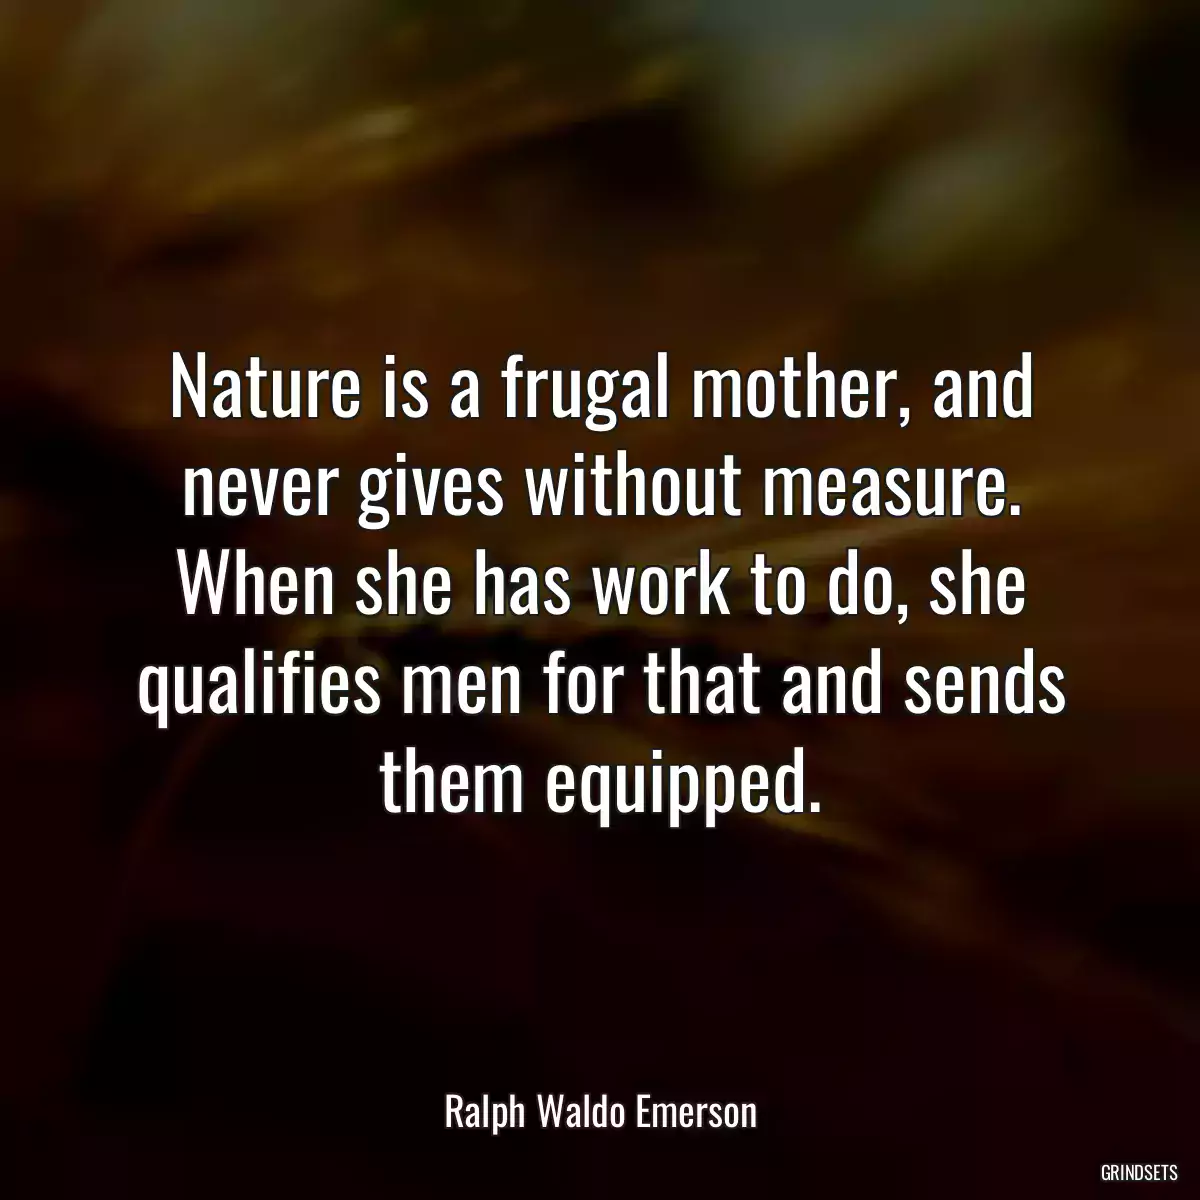 Nature is a frugal mother, and never gives without measure. When she has work to do, she qualifies men for that and sends them equipped.